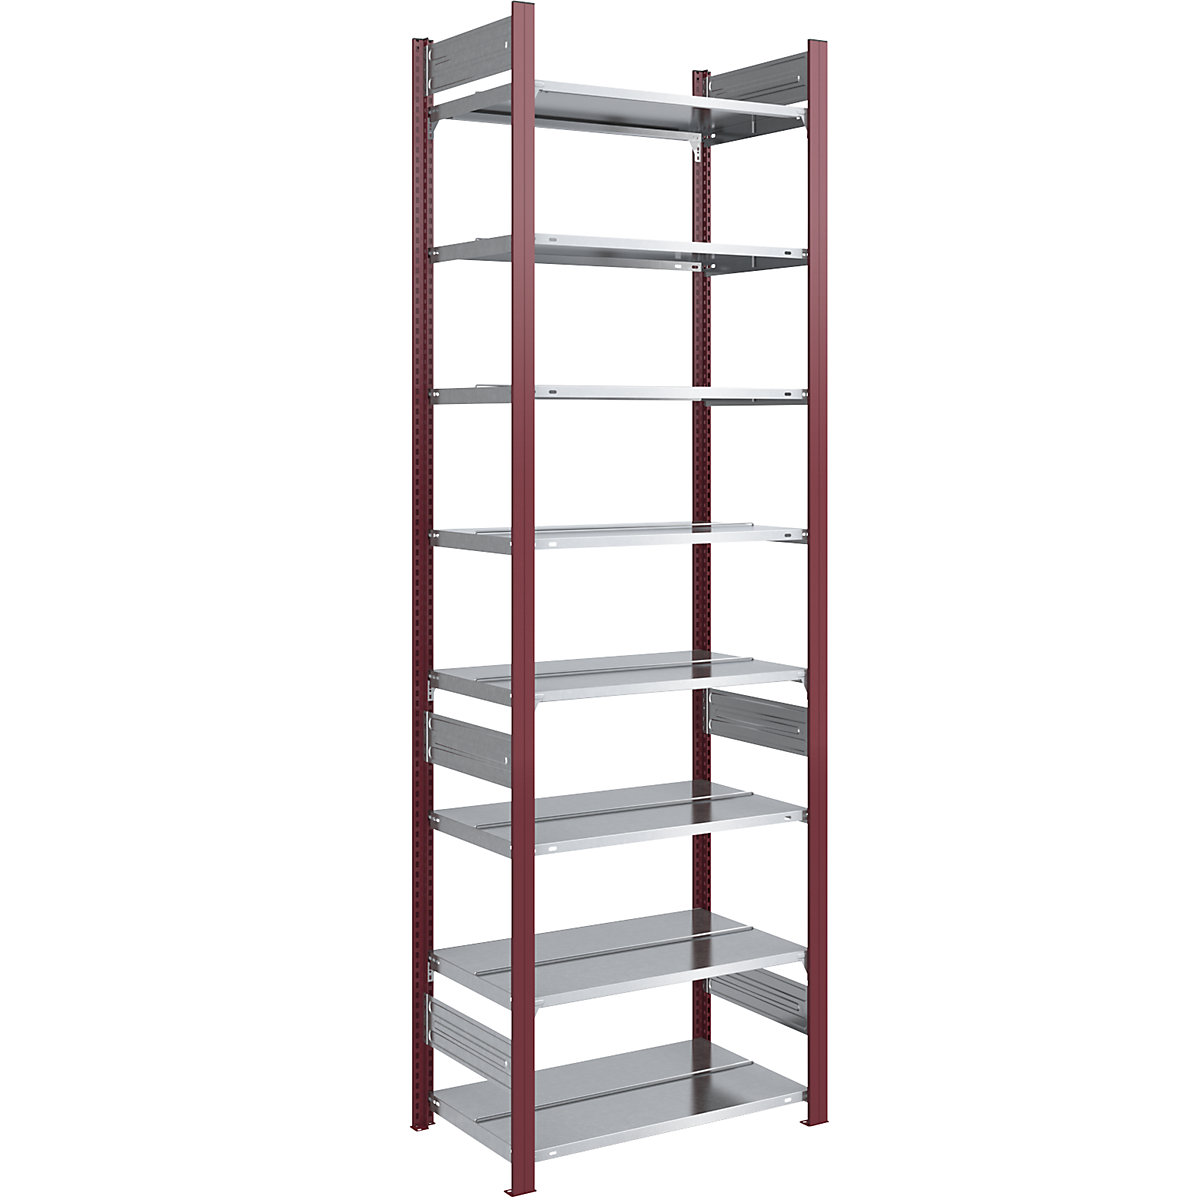 Boltless Archive Shelving Double Sided, Two Sided Shelving Unit